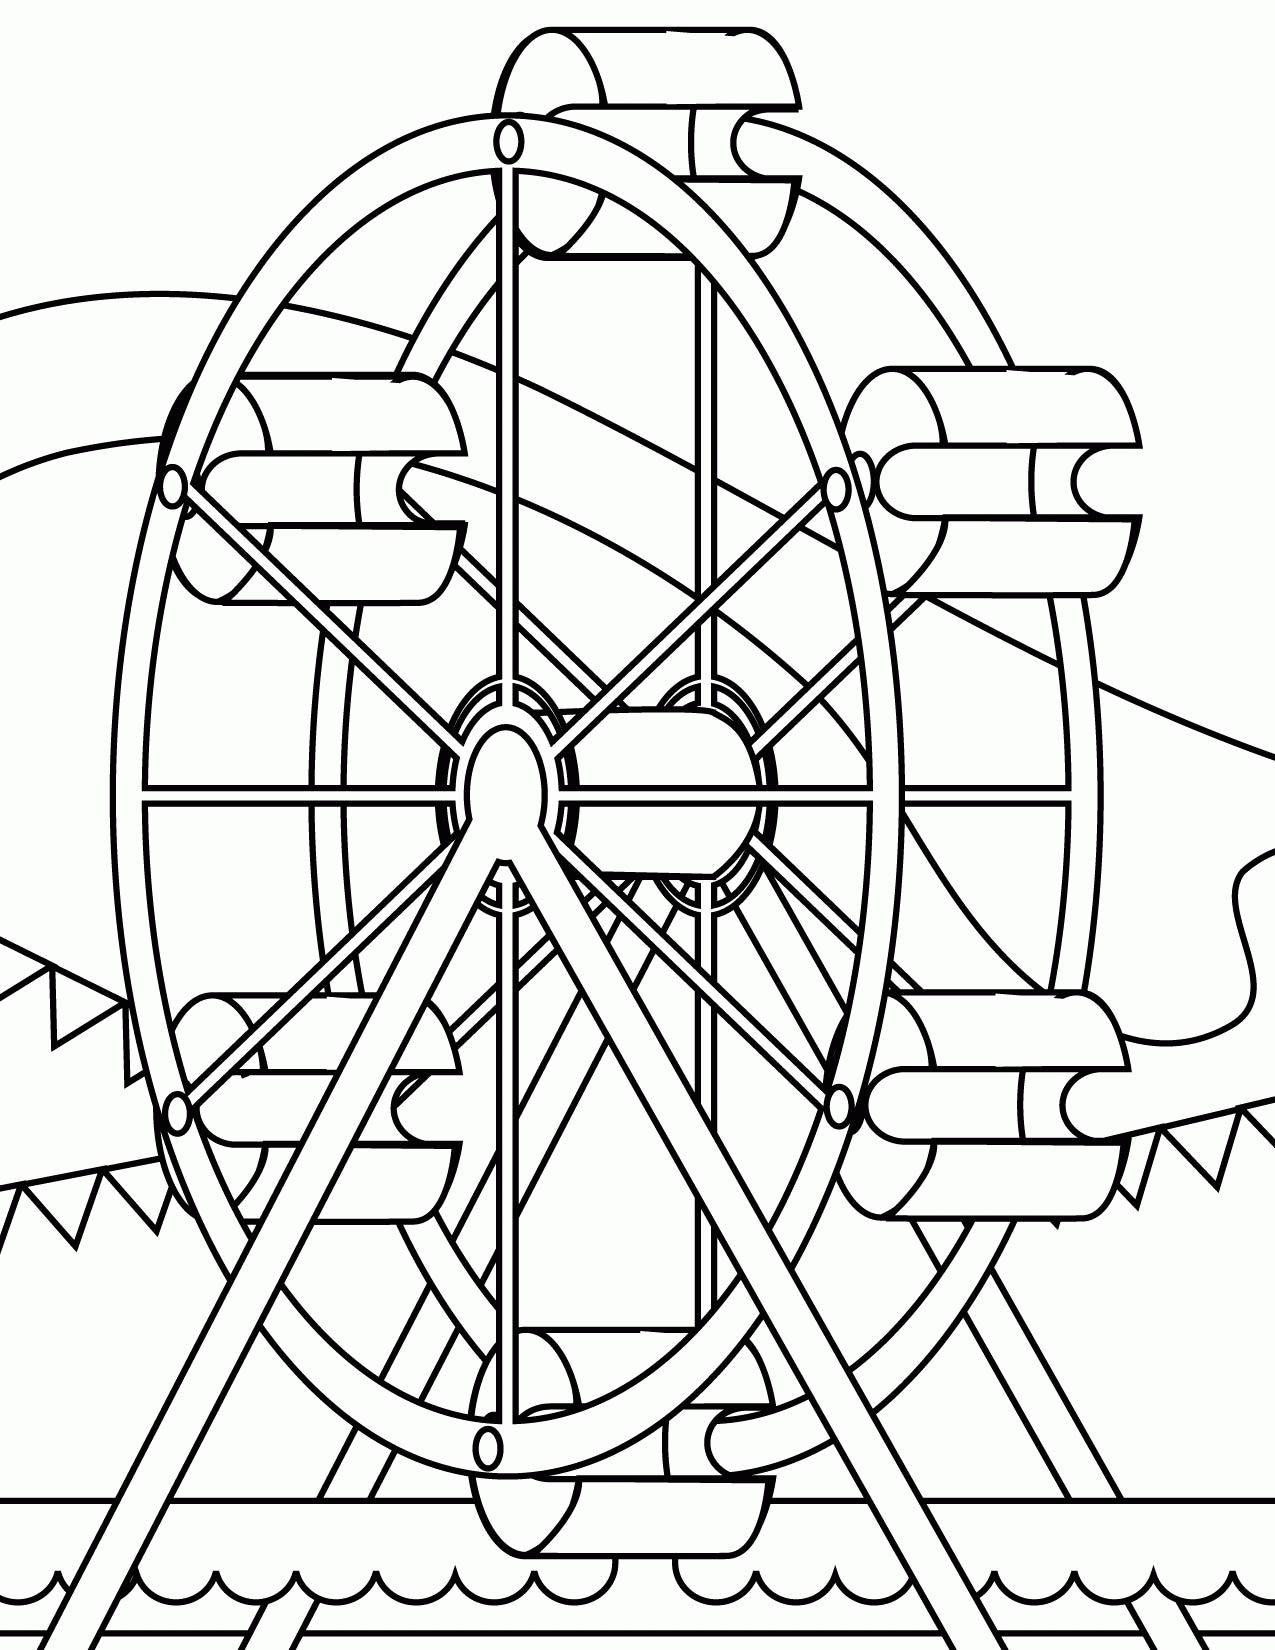 Ferris Wheel Coloring Page - Handipoints